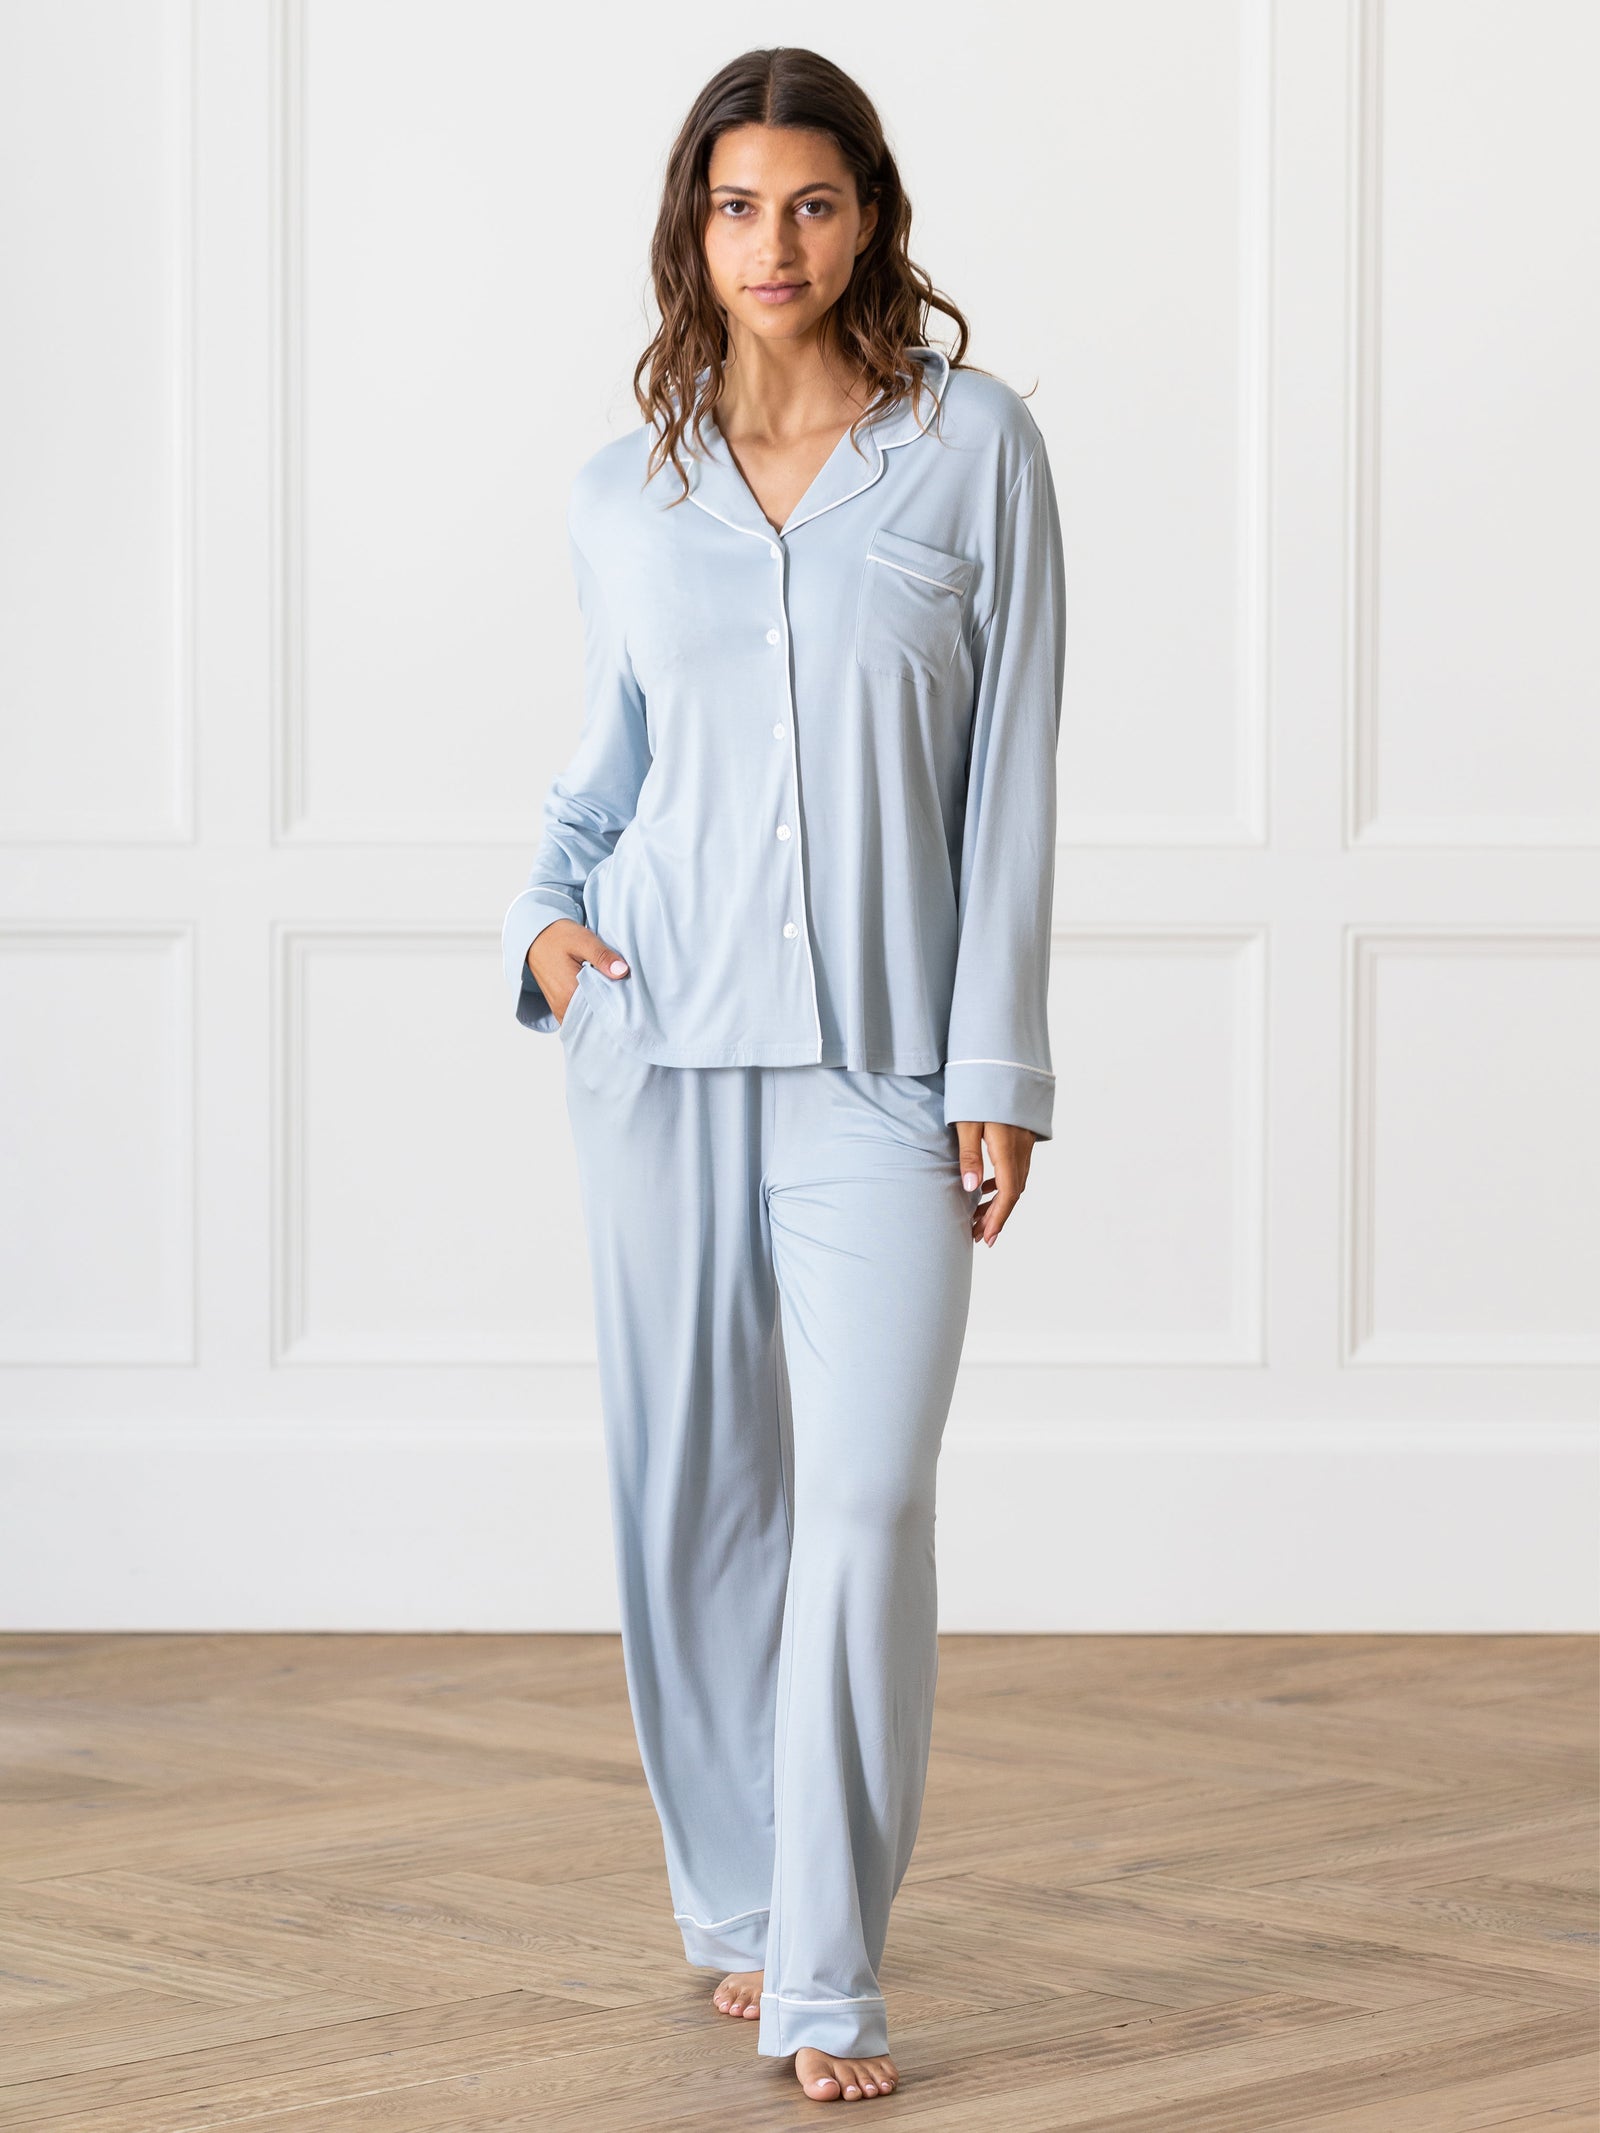 Powder Blue Long Sleeve Pajama Set modeled by a woman. The photo was taken in a high contrast setting, showing off the colors and lines of the pajamas. 